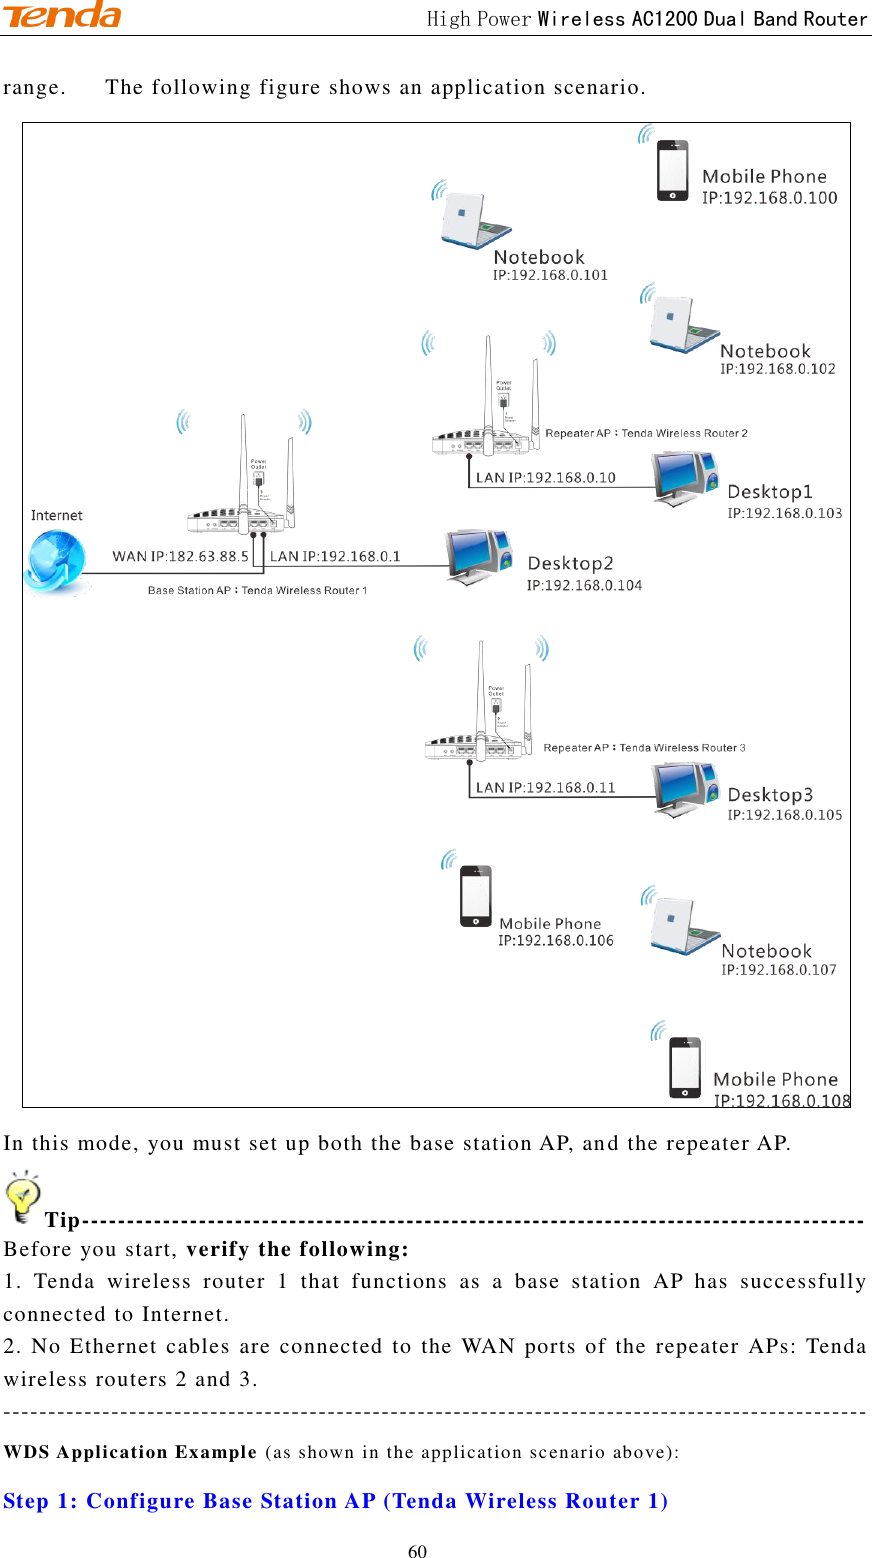                                             High Power Wireless AC1200 Dual Band Router 60 range.      The following figure shows an application scenario.  In this mode, you must set up both the base station AP, and the repeater AP. Tip--------------------------------------------------------------------------------------- Before you start, verify the following: 1.  Tenda  wireless  router  1  that  functions  as  a  base  station  AP  has  successfully connected to Internet. 2. No Ethernet cables are connected to the WAN  ports  of the  repeater APs: Tenda wireless routers 2 and 3. ------------------------------------------------------------------------------------------------ WDS Application Example (as shown in the application scenario above): Step 1: Configure Base Station AP (Tenda Wireless Router 1) 